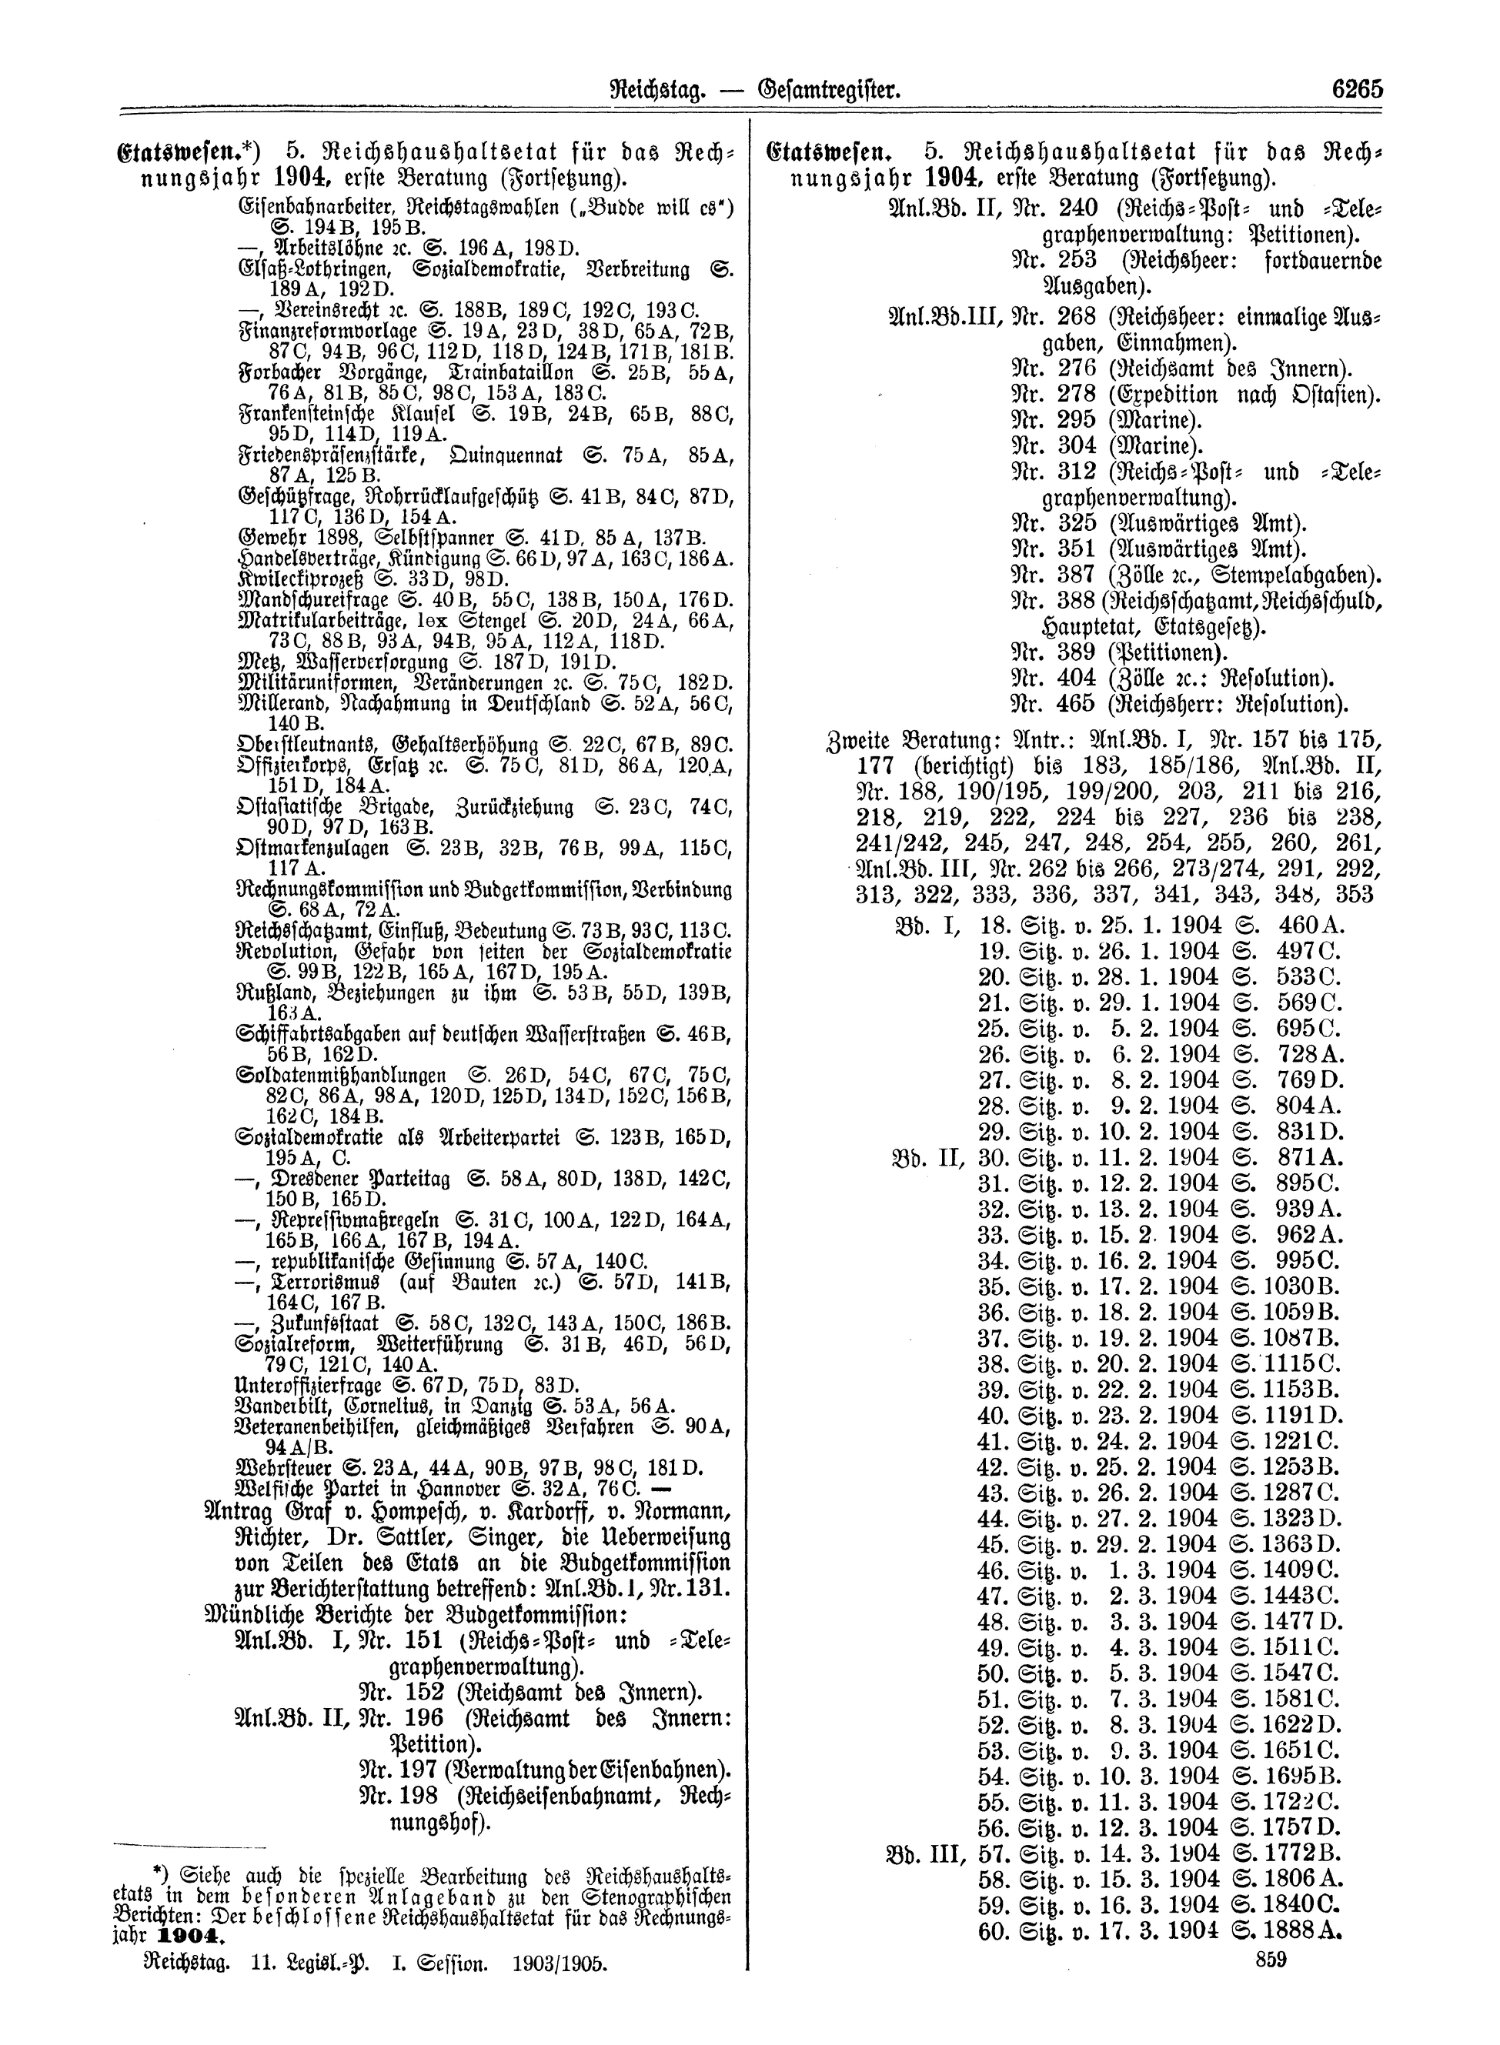 Scan of page 6265